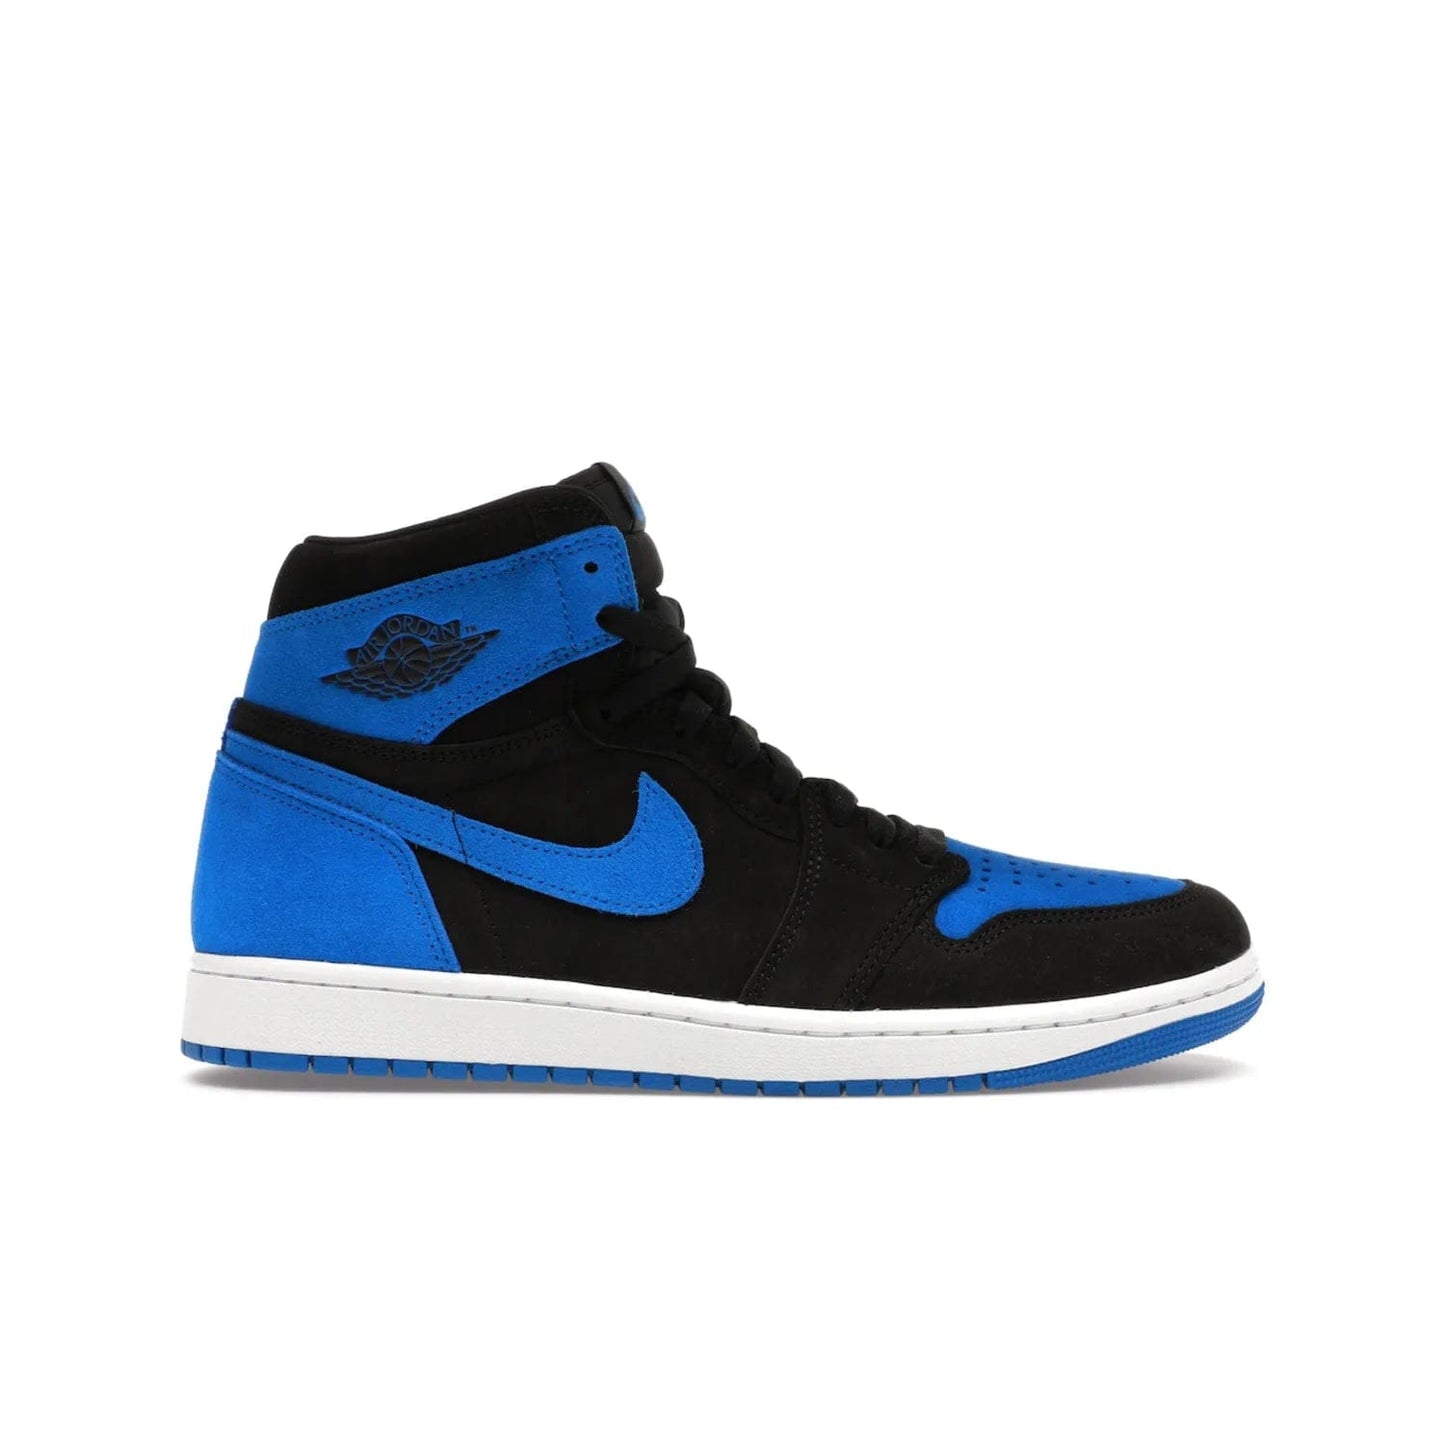 Jordan 1 Retro High OG Royal Reimagined - Image 1 - Only at www.BallersClubKickz.com - ####
Old meets the new: Jordan 1 Retro High OG 'Royal Reimagined' is a bold statement of evolution with its royal blue and black suede material makeup. Swoosh overlays, Wings logos, padded ankle collars and Nike Air tags maintain the OG's legendary lineage. Get a pair on November 4th and be part of a fearless, unyielding story.